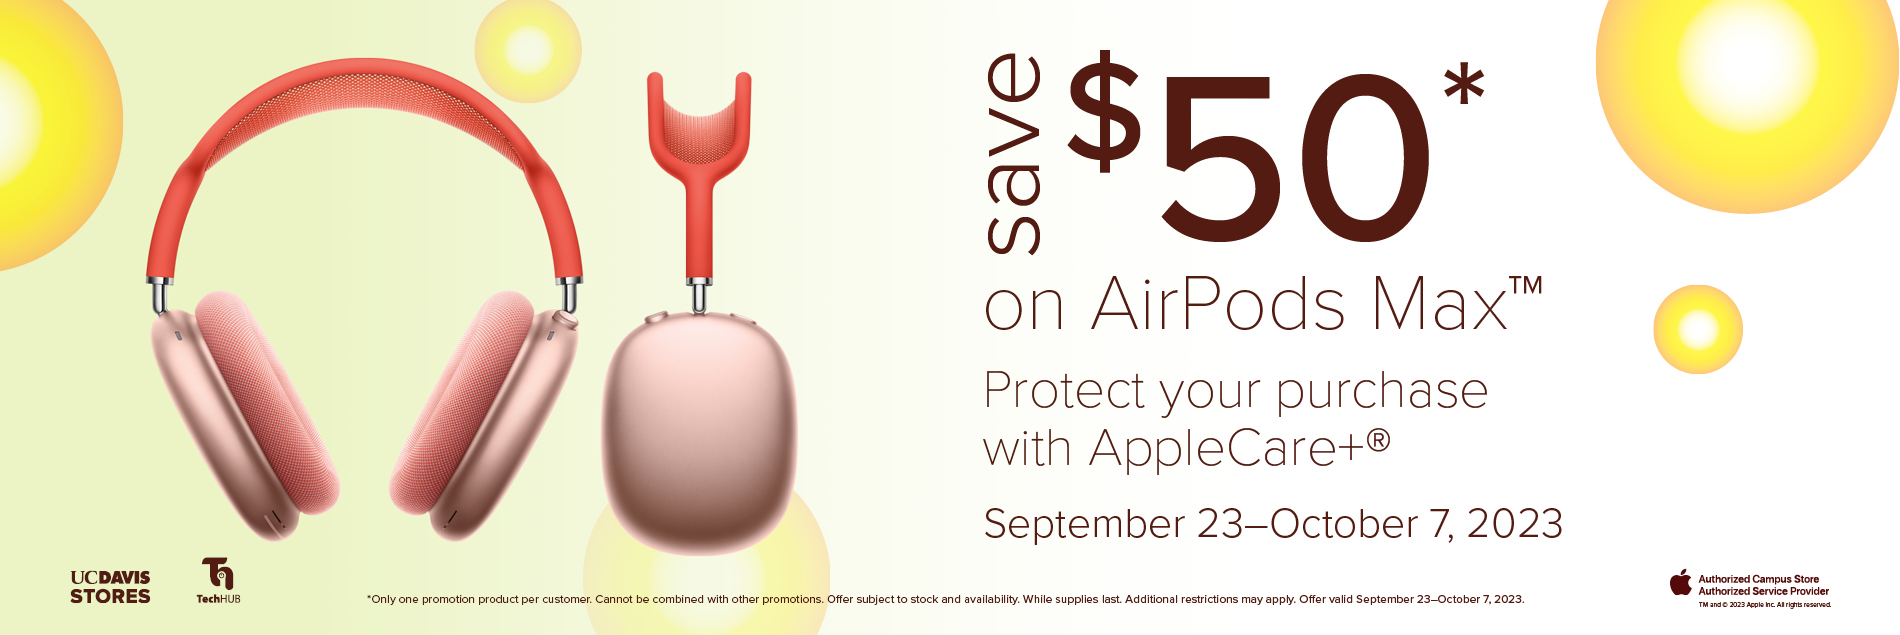 Save $50 on AirPods Max.